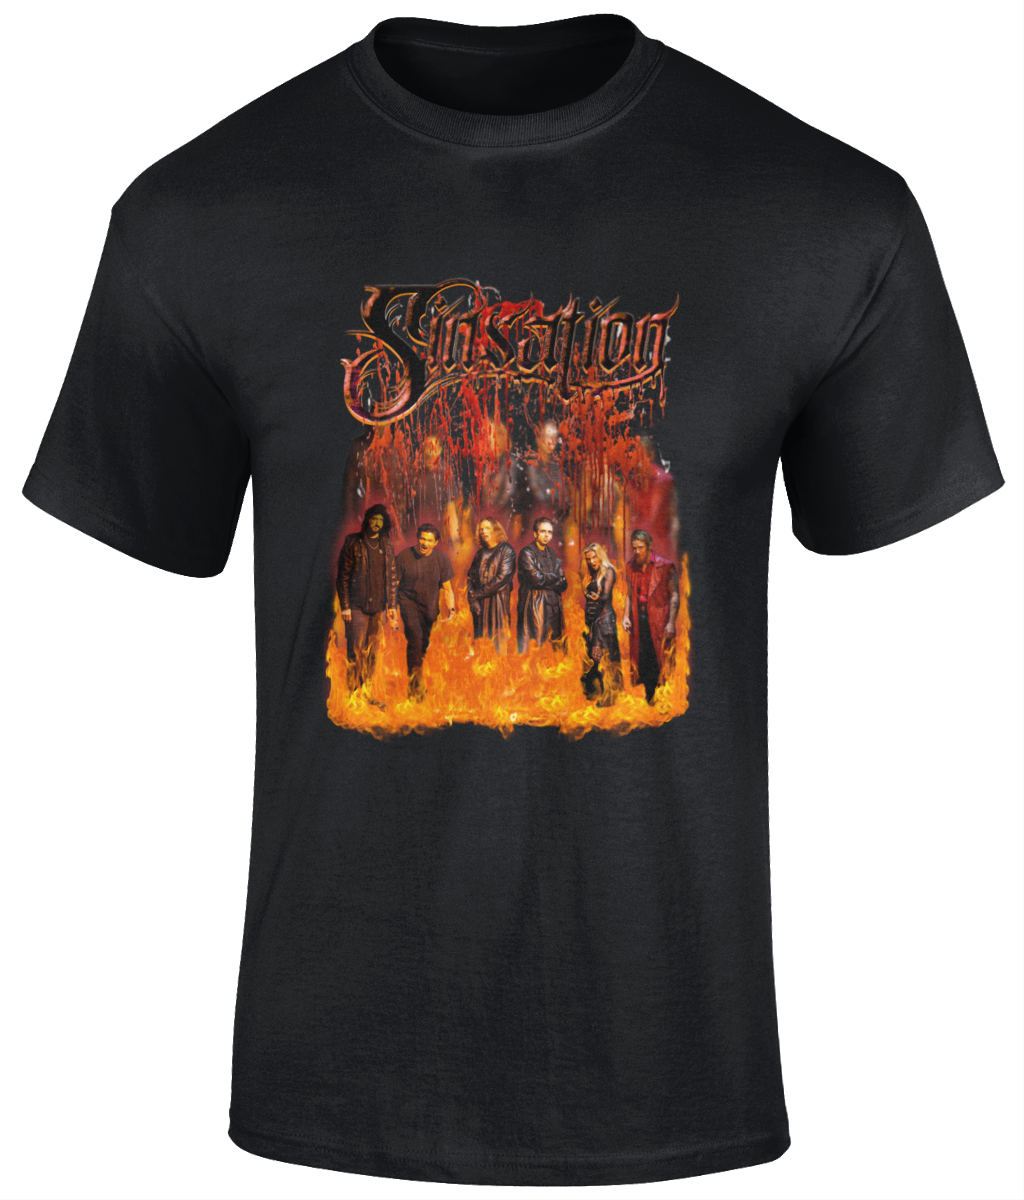 Poison Valley clothing presents "SINSATION ON FIRE"  Full colour image on black cotton gilden t shirt.  Material: 100% cotton.  Seamless twin needle collar. Taped neck and shoulders. Tubular body. Twin needle sleeves and hem. Sizes: Small, medium, large, XL, 2XL, 3XL, 4XL, 5XL 